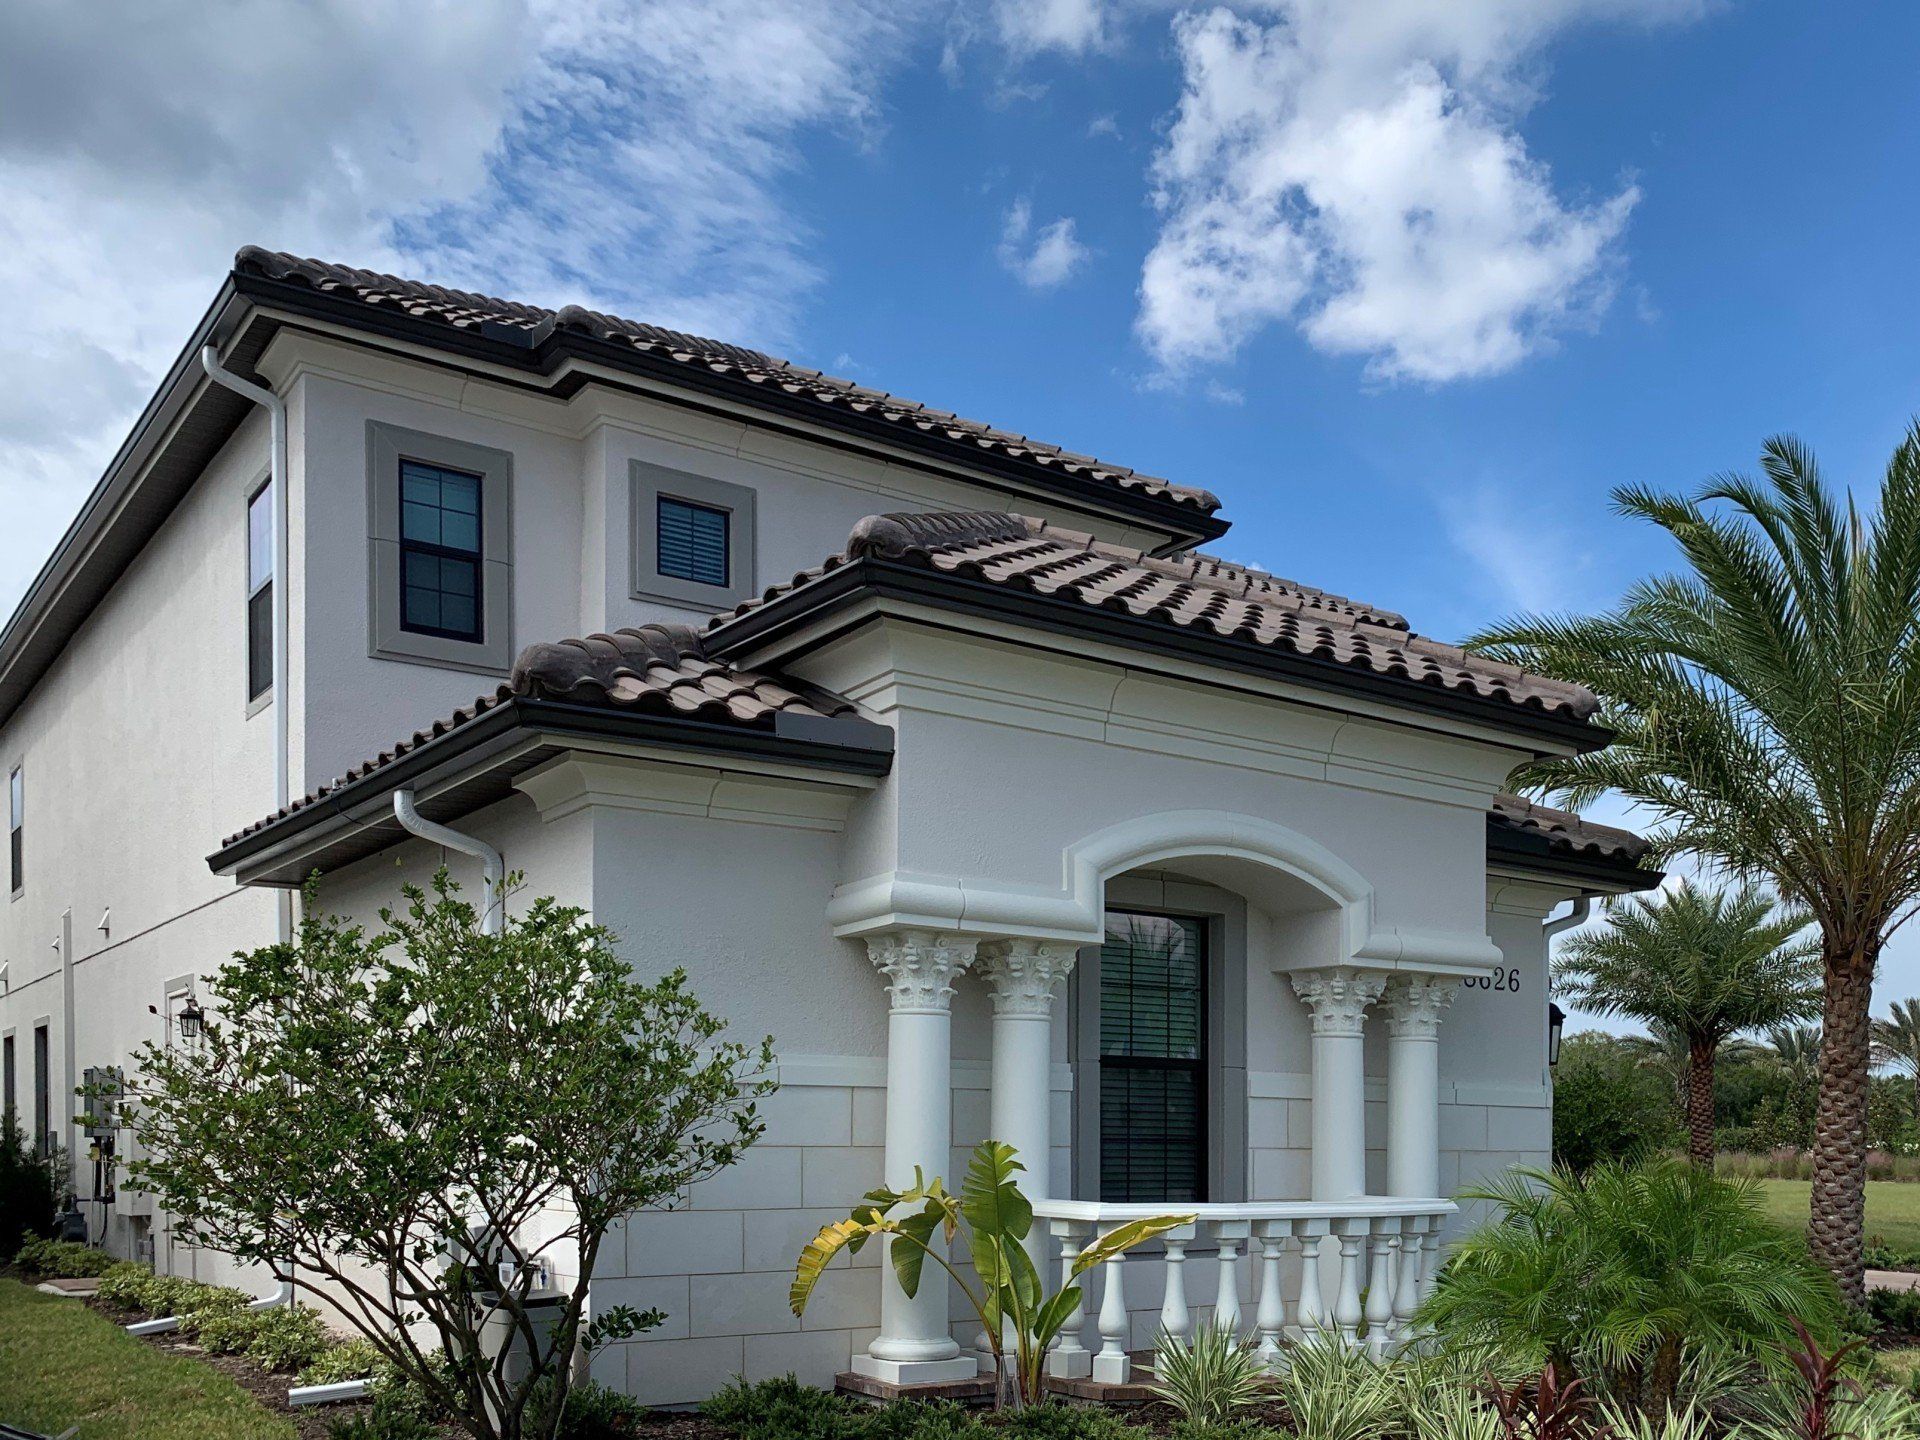 Gutter Installation in Tampa FL After Image